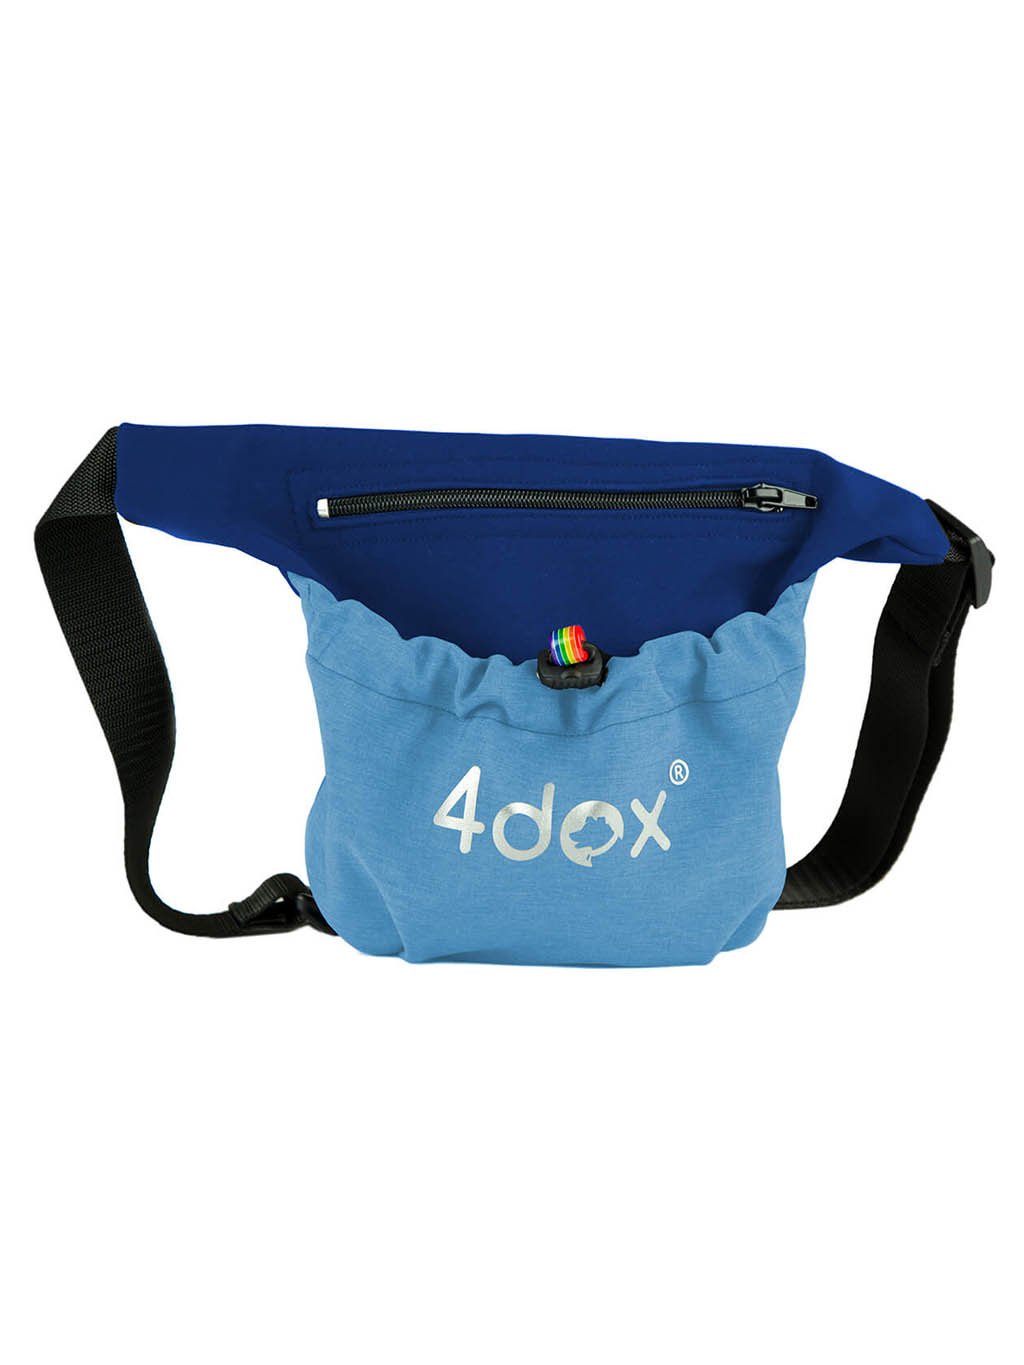 Dog training treat pouch 2 in 1 blue